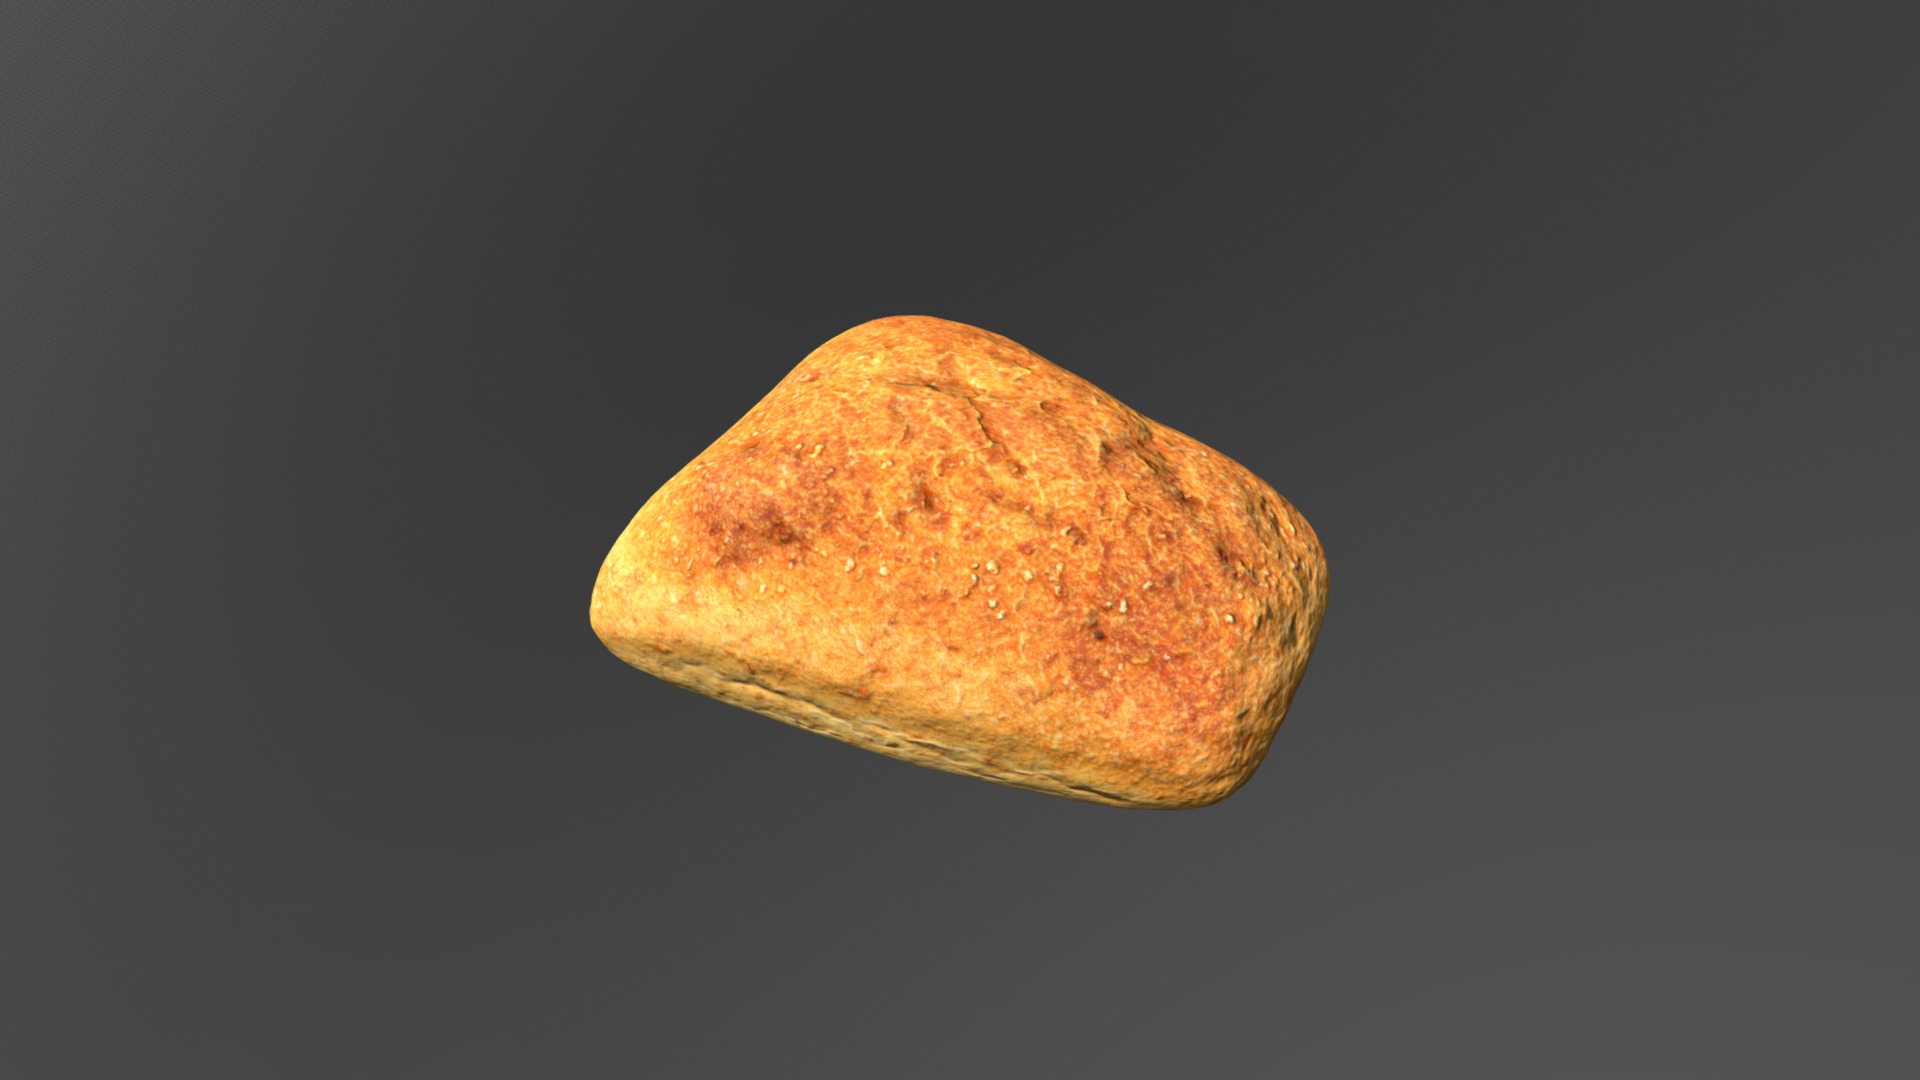 3D model 3D Scan Weizenbroetchen – Low Poly - This is a 3D model of the 3D Scan Weizenbroetchen - Low Poly. The 3D model is about a potato with a black background.